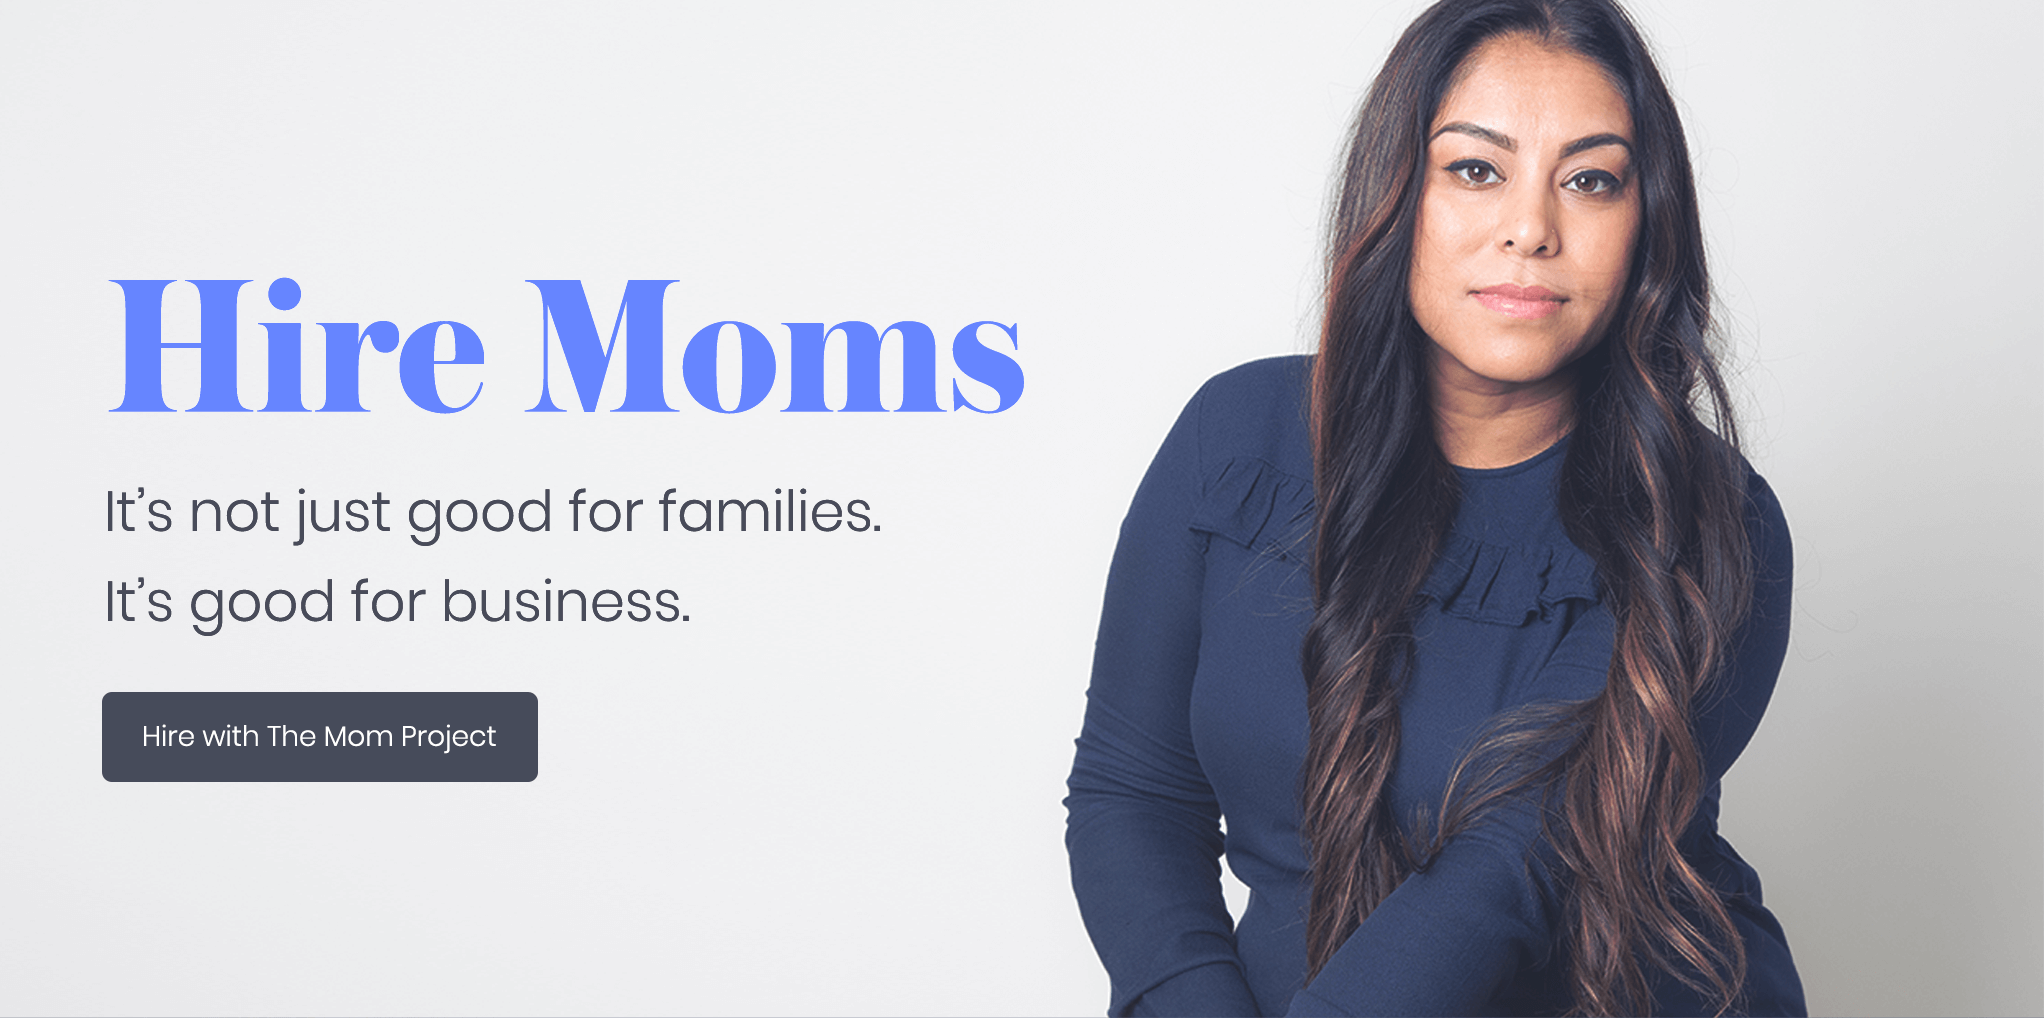 Hire Moms. It's not just good for families; it's good for business.